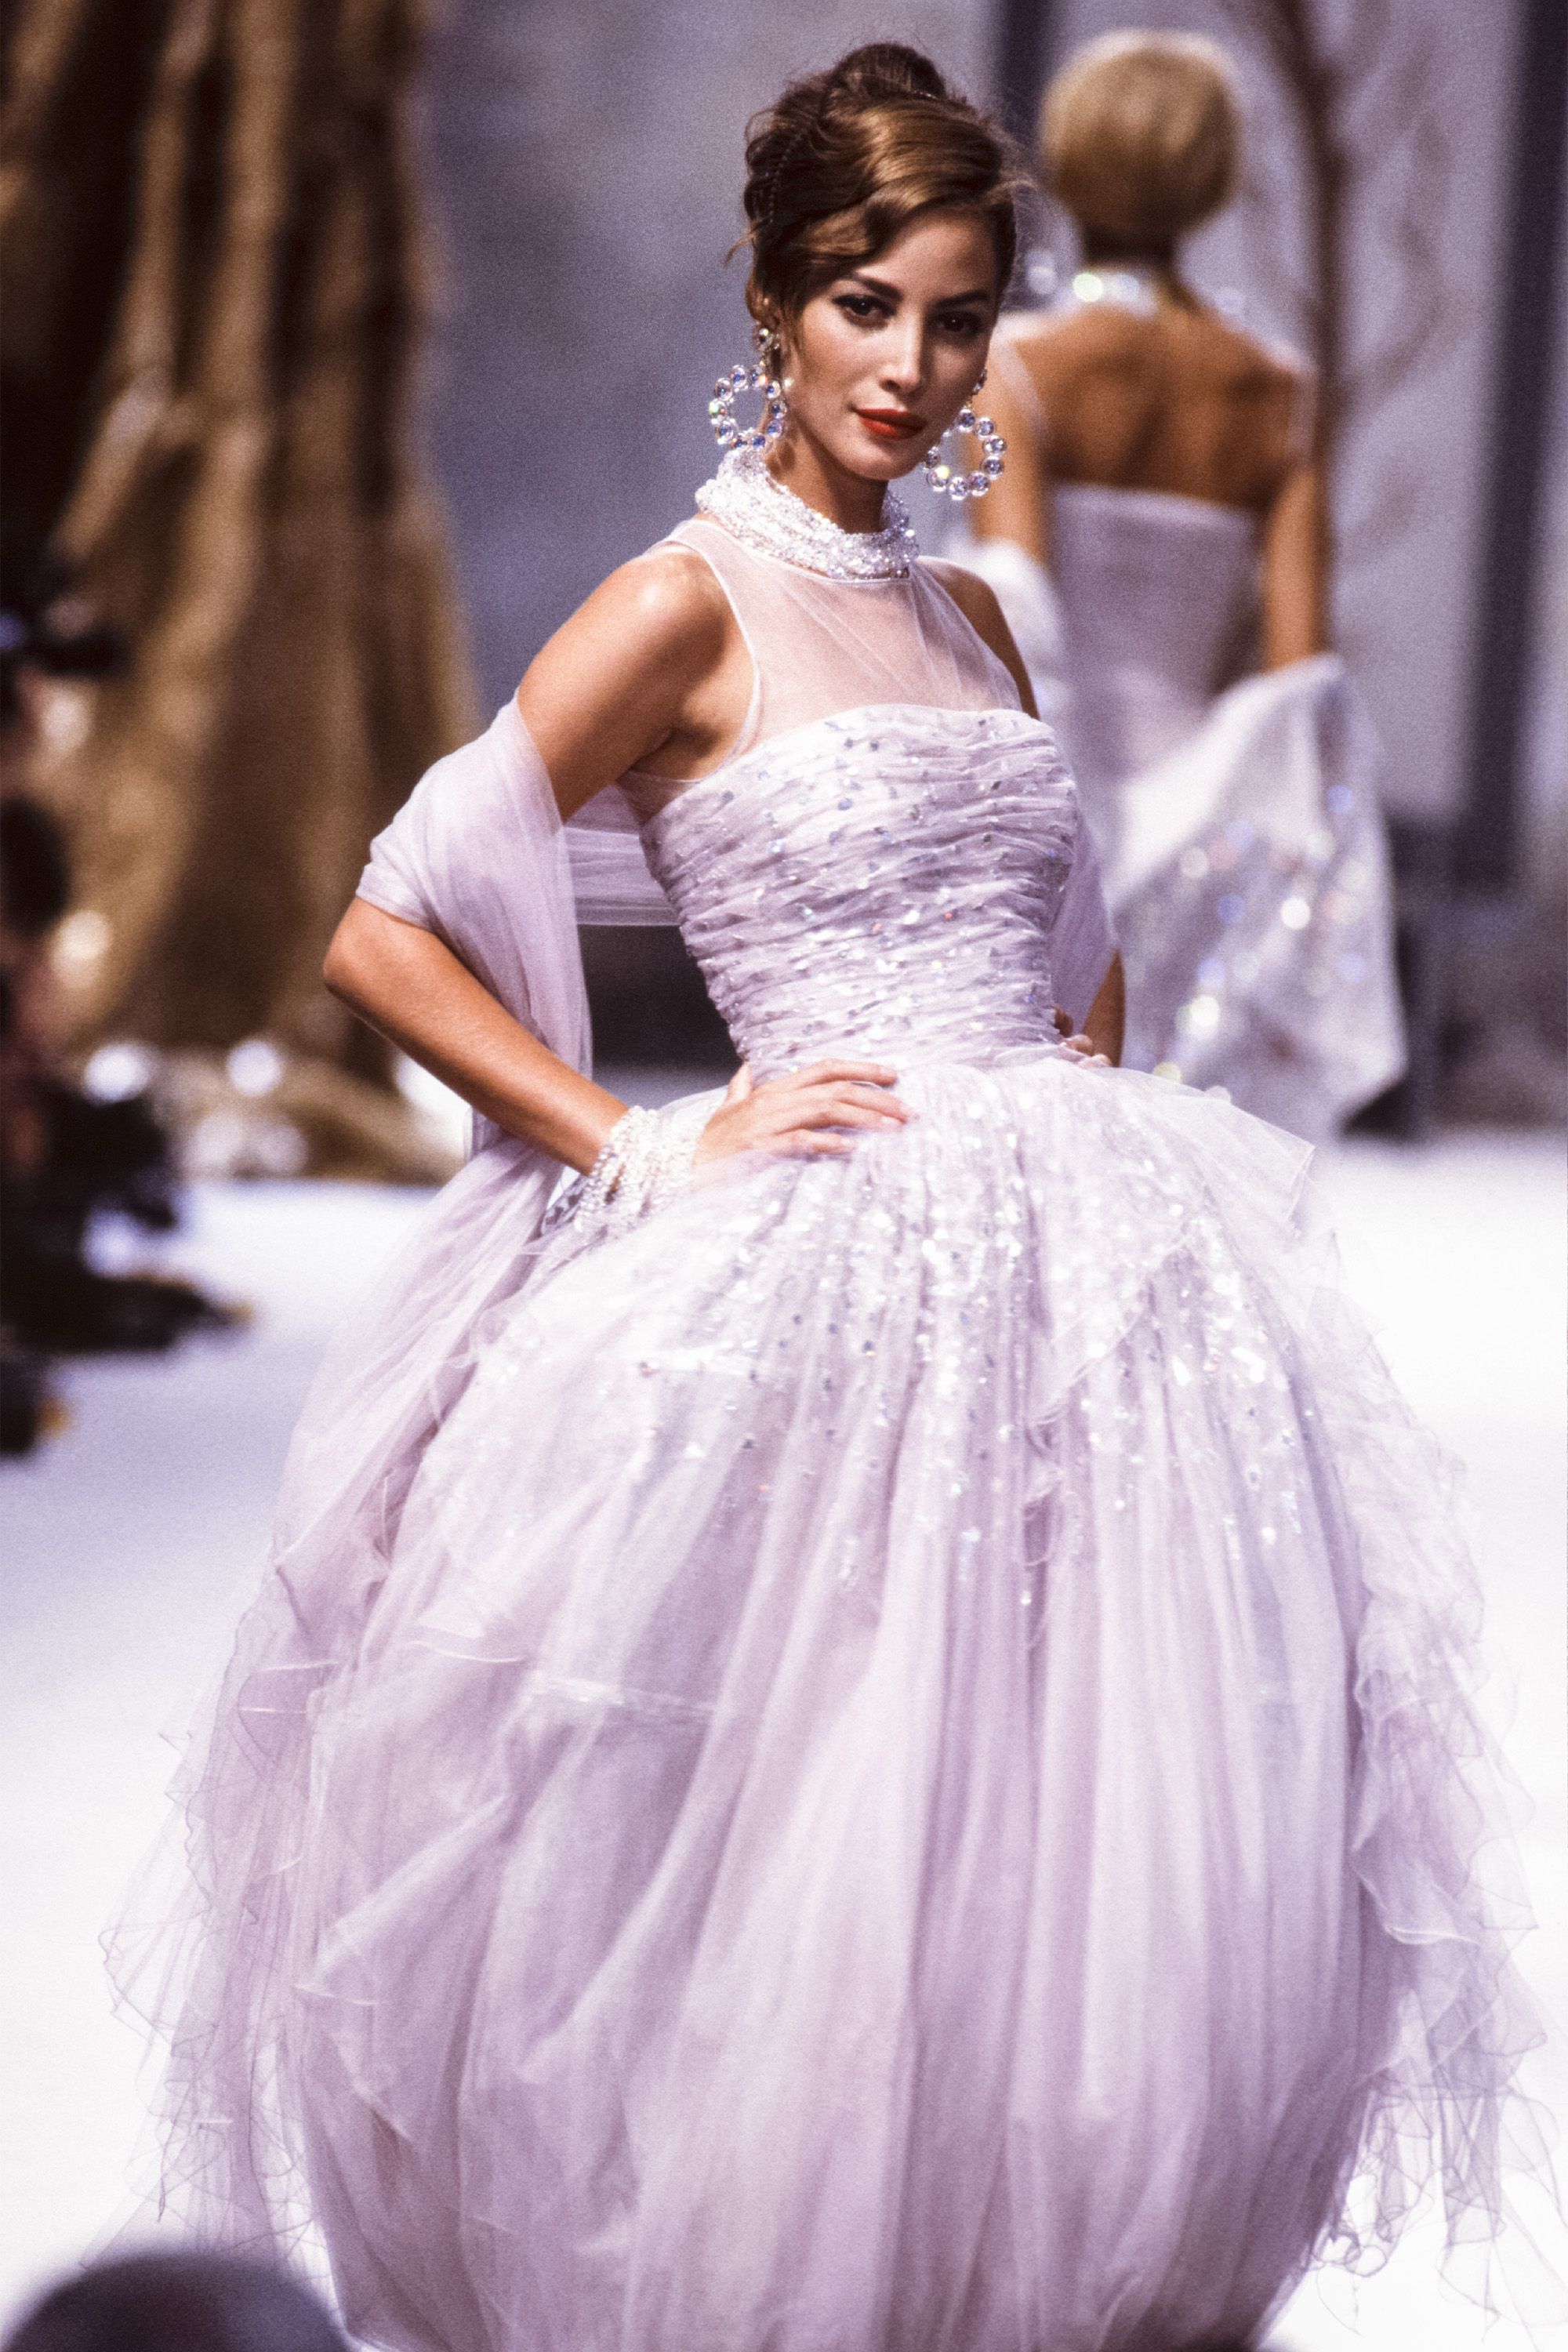 61 Iconic Karl Lagerfeld-designed Chanel couture brides